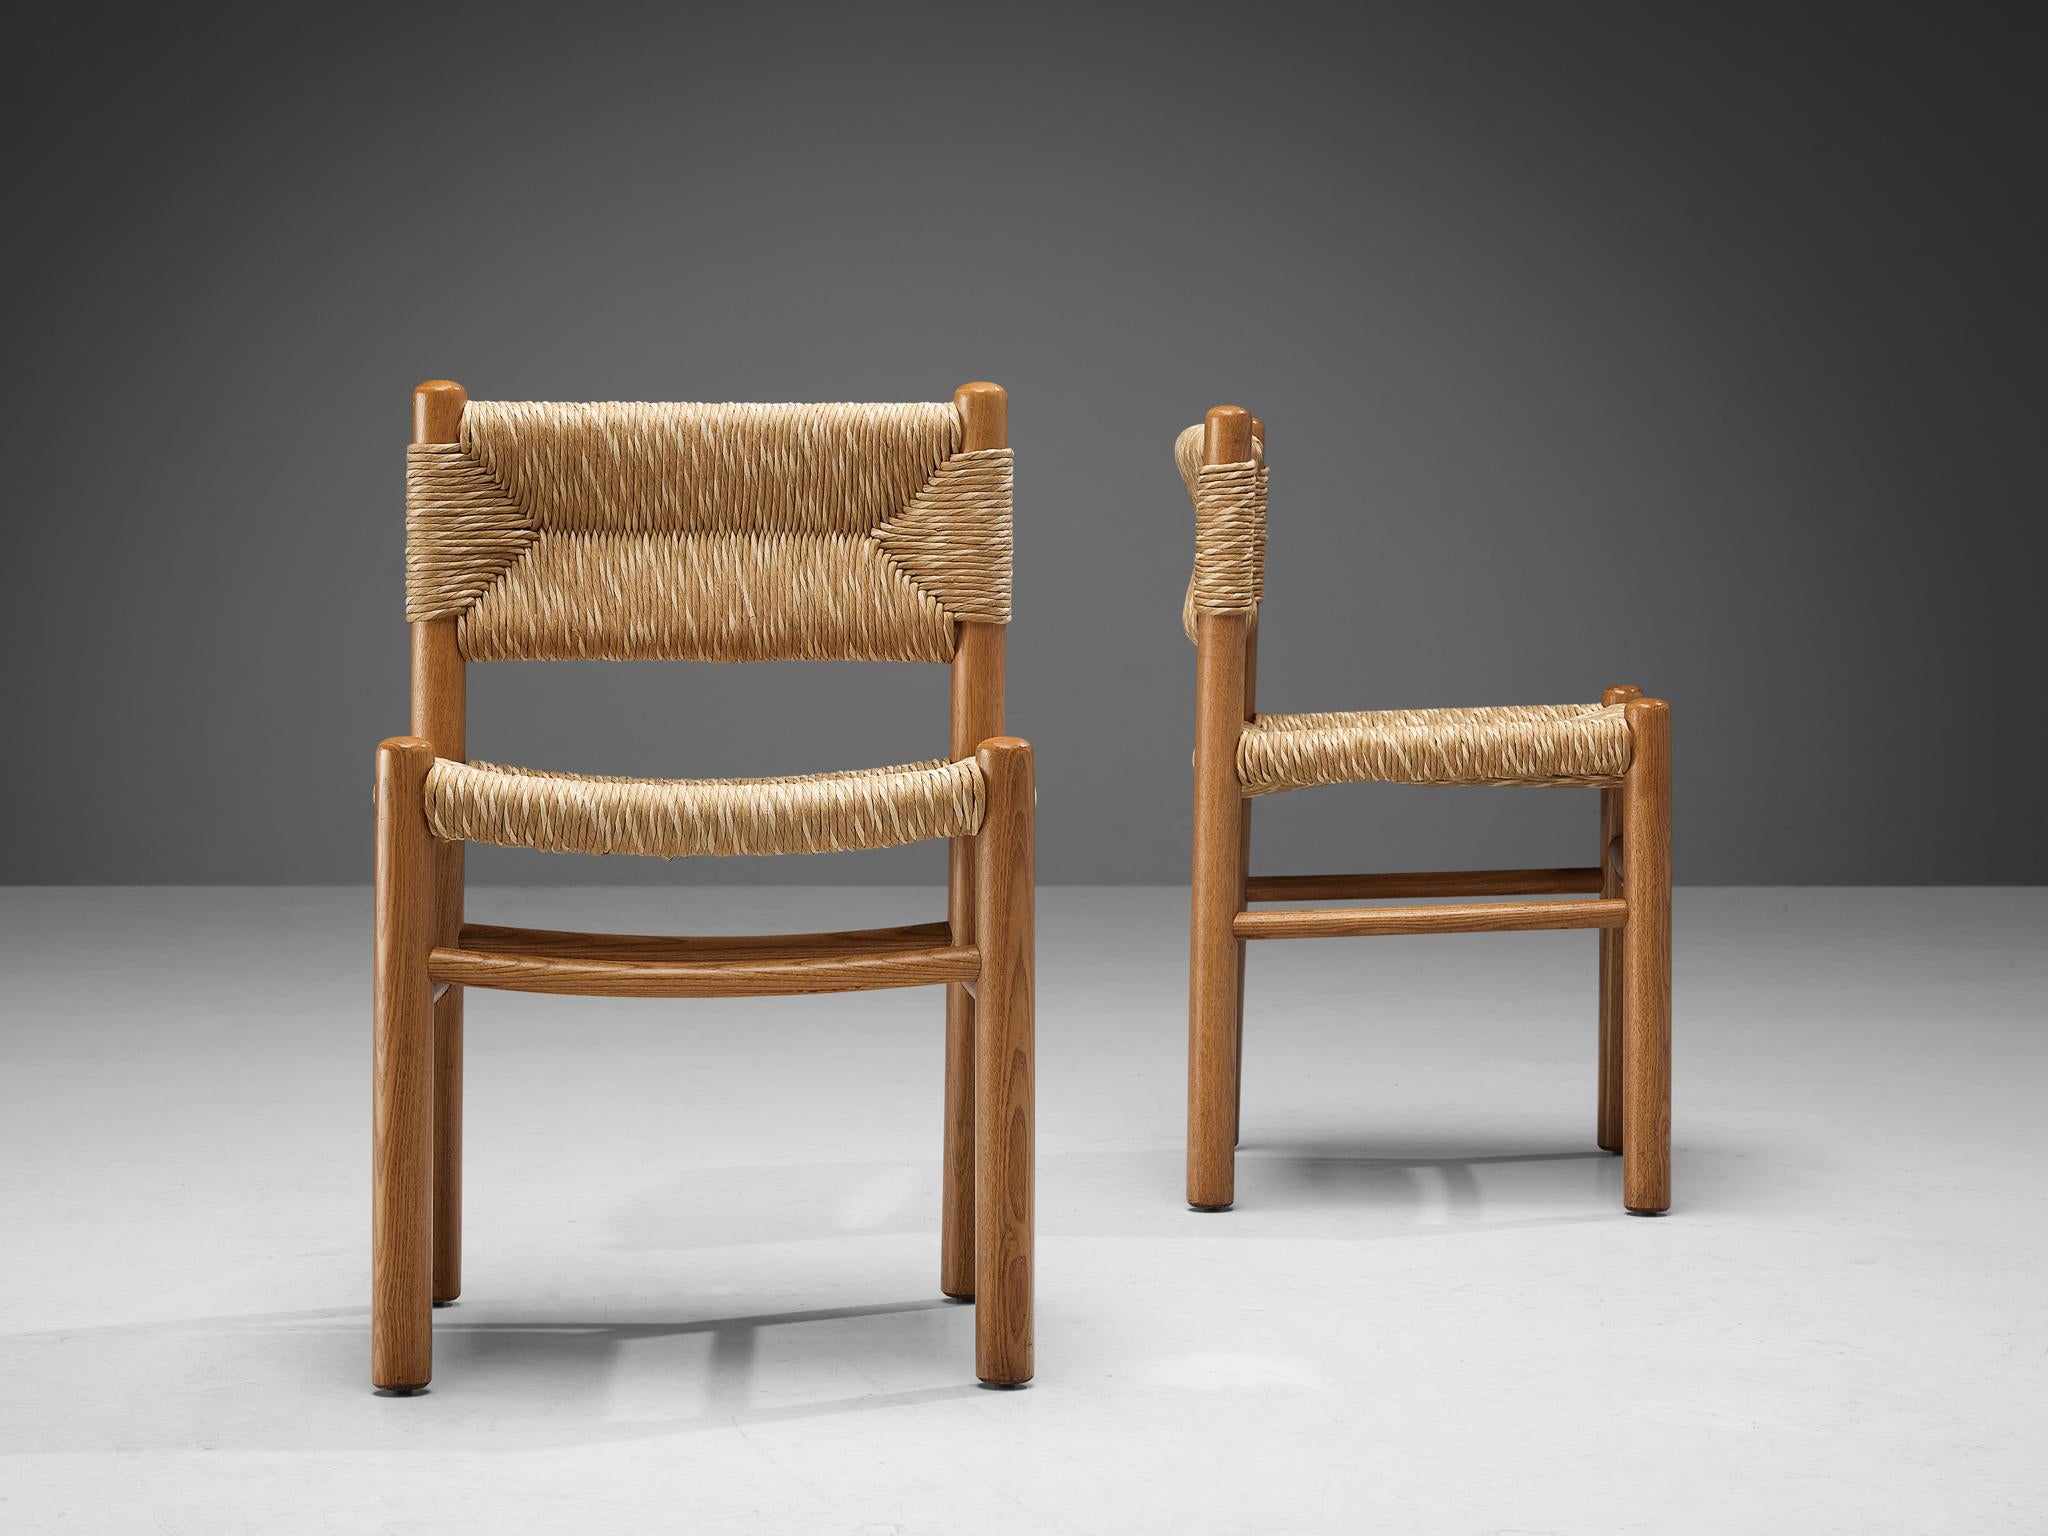 Set of Four French Dining Chairs in Oak and Straw